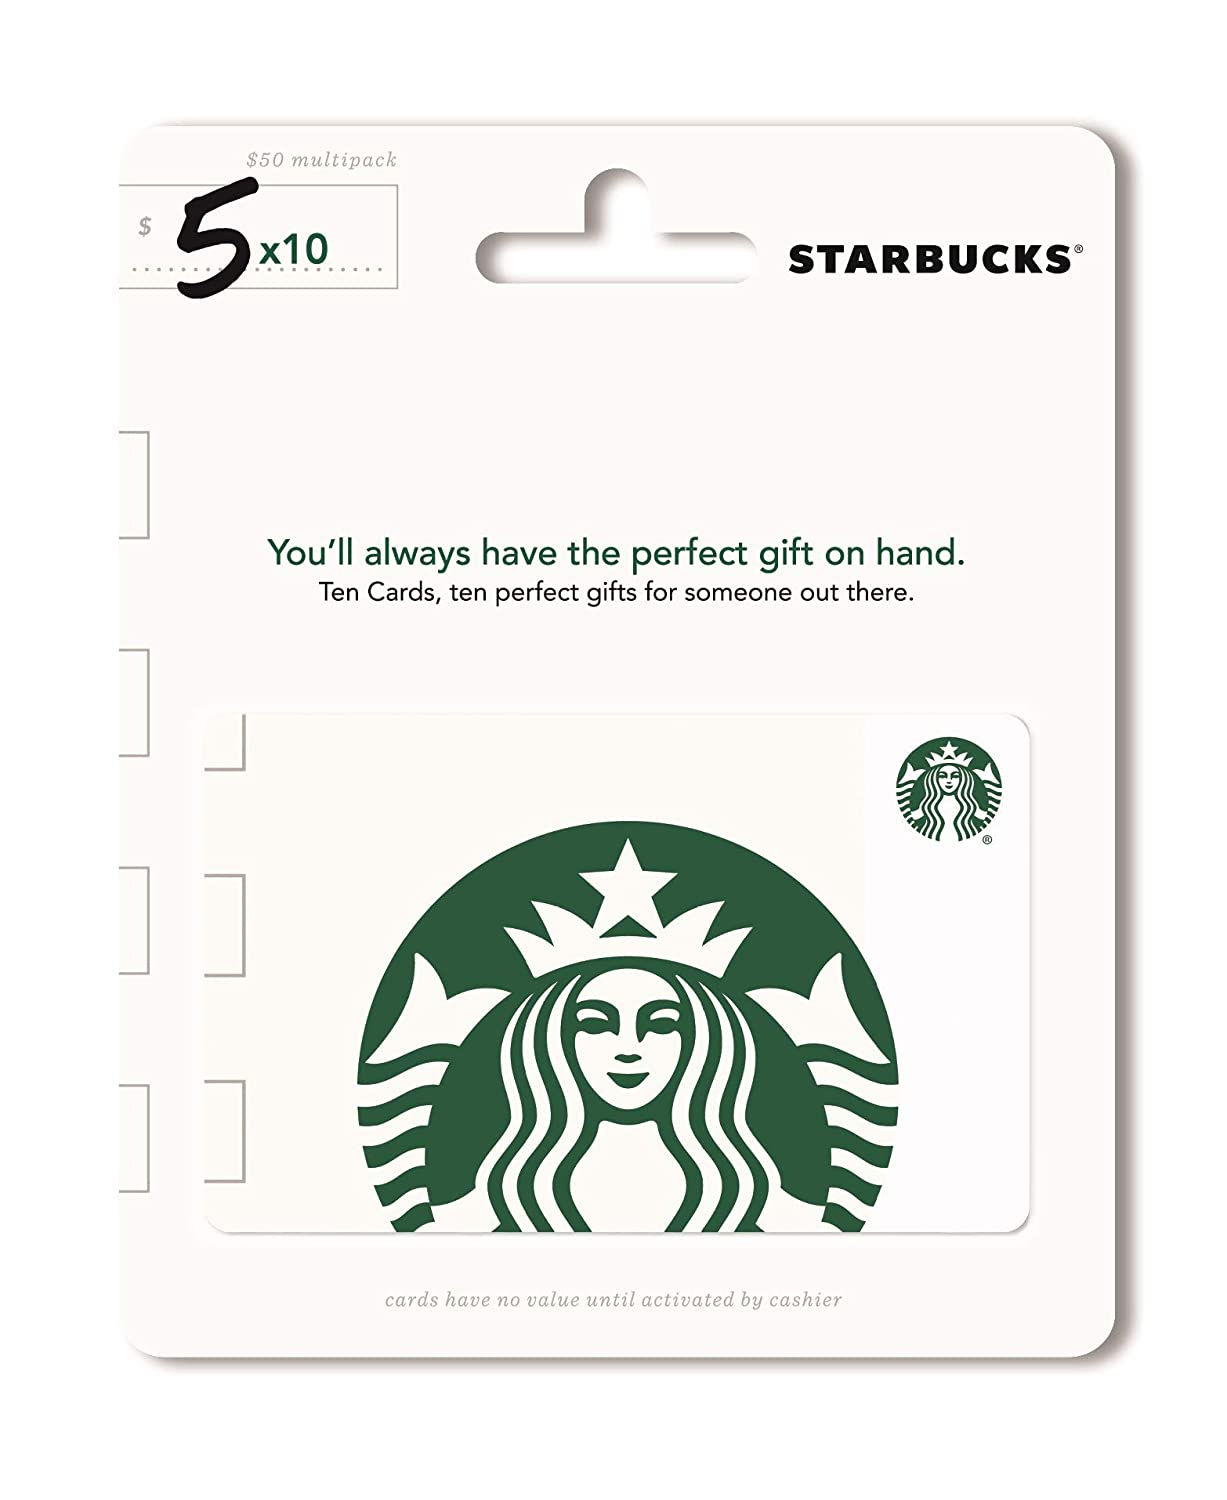 gifts-under-$5-gift-card